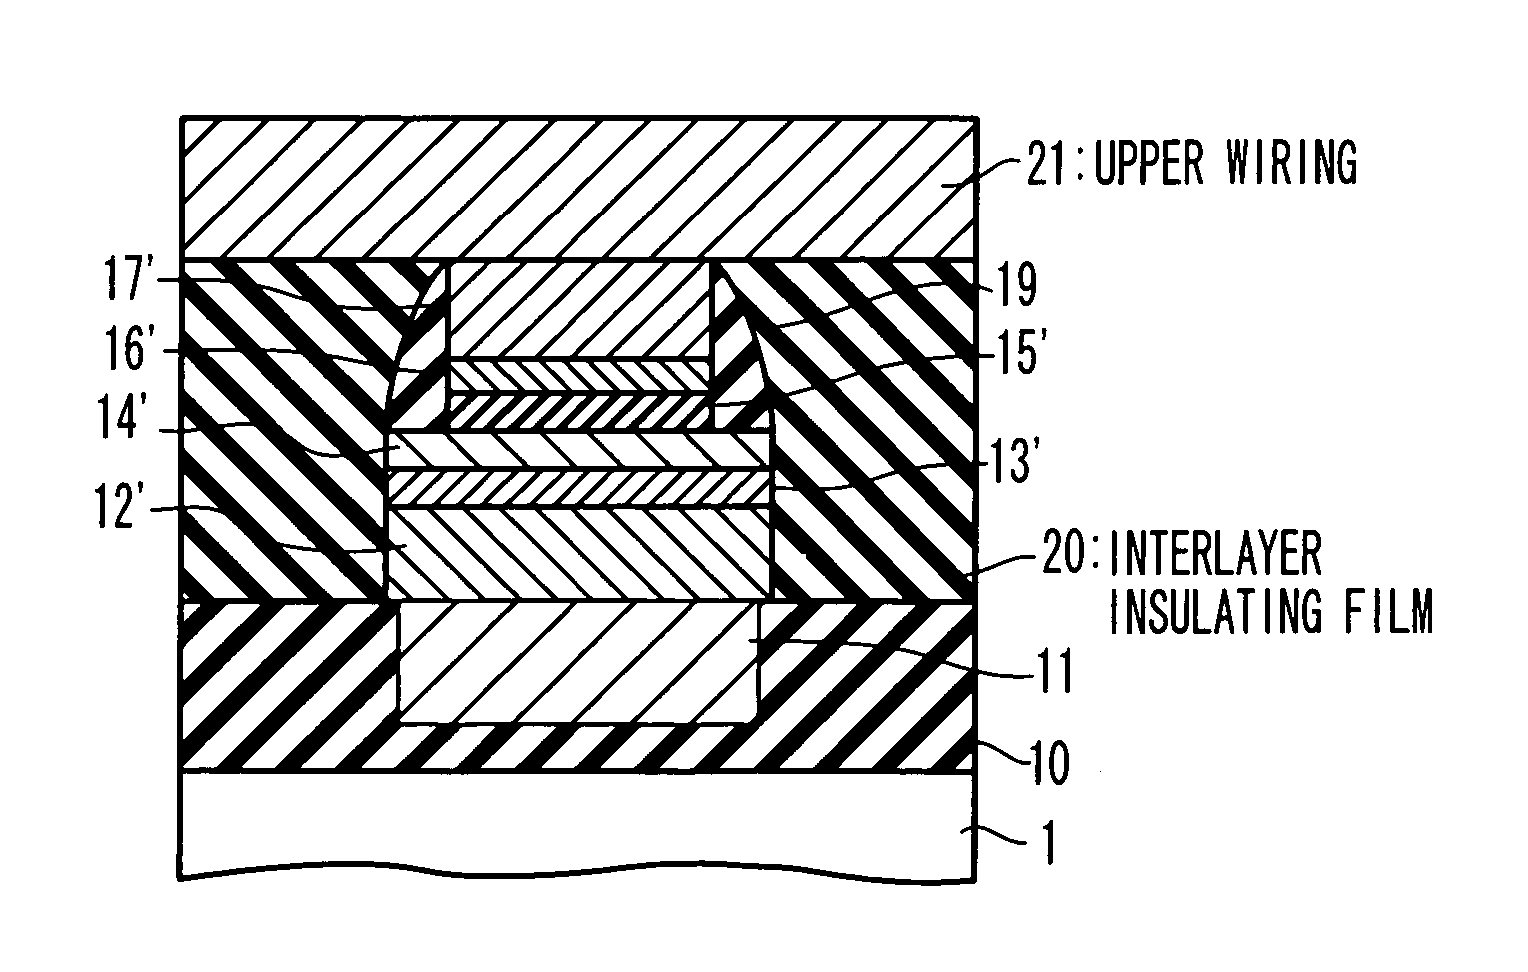 Magnetic memory and method of manufacturing the memory